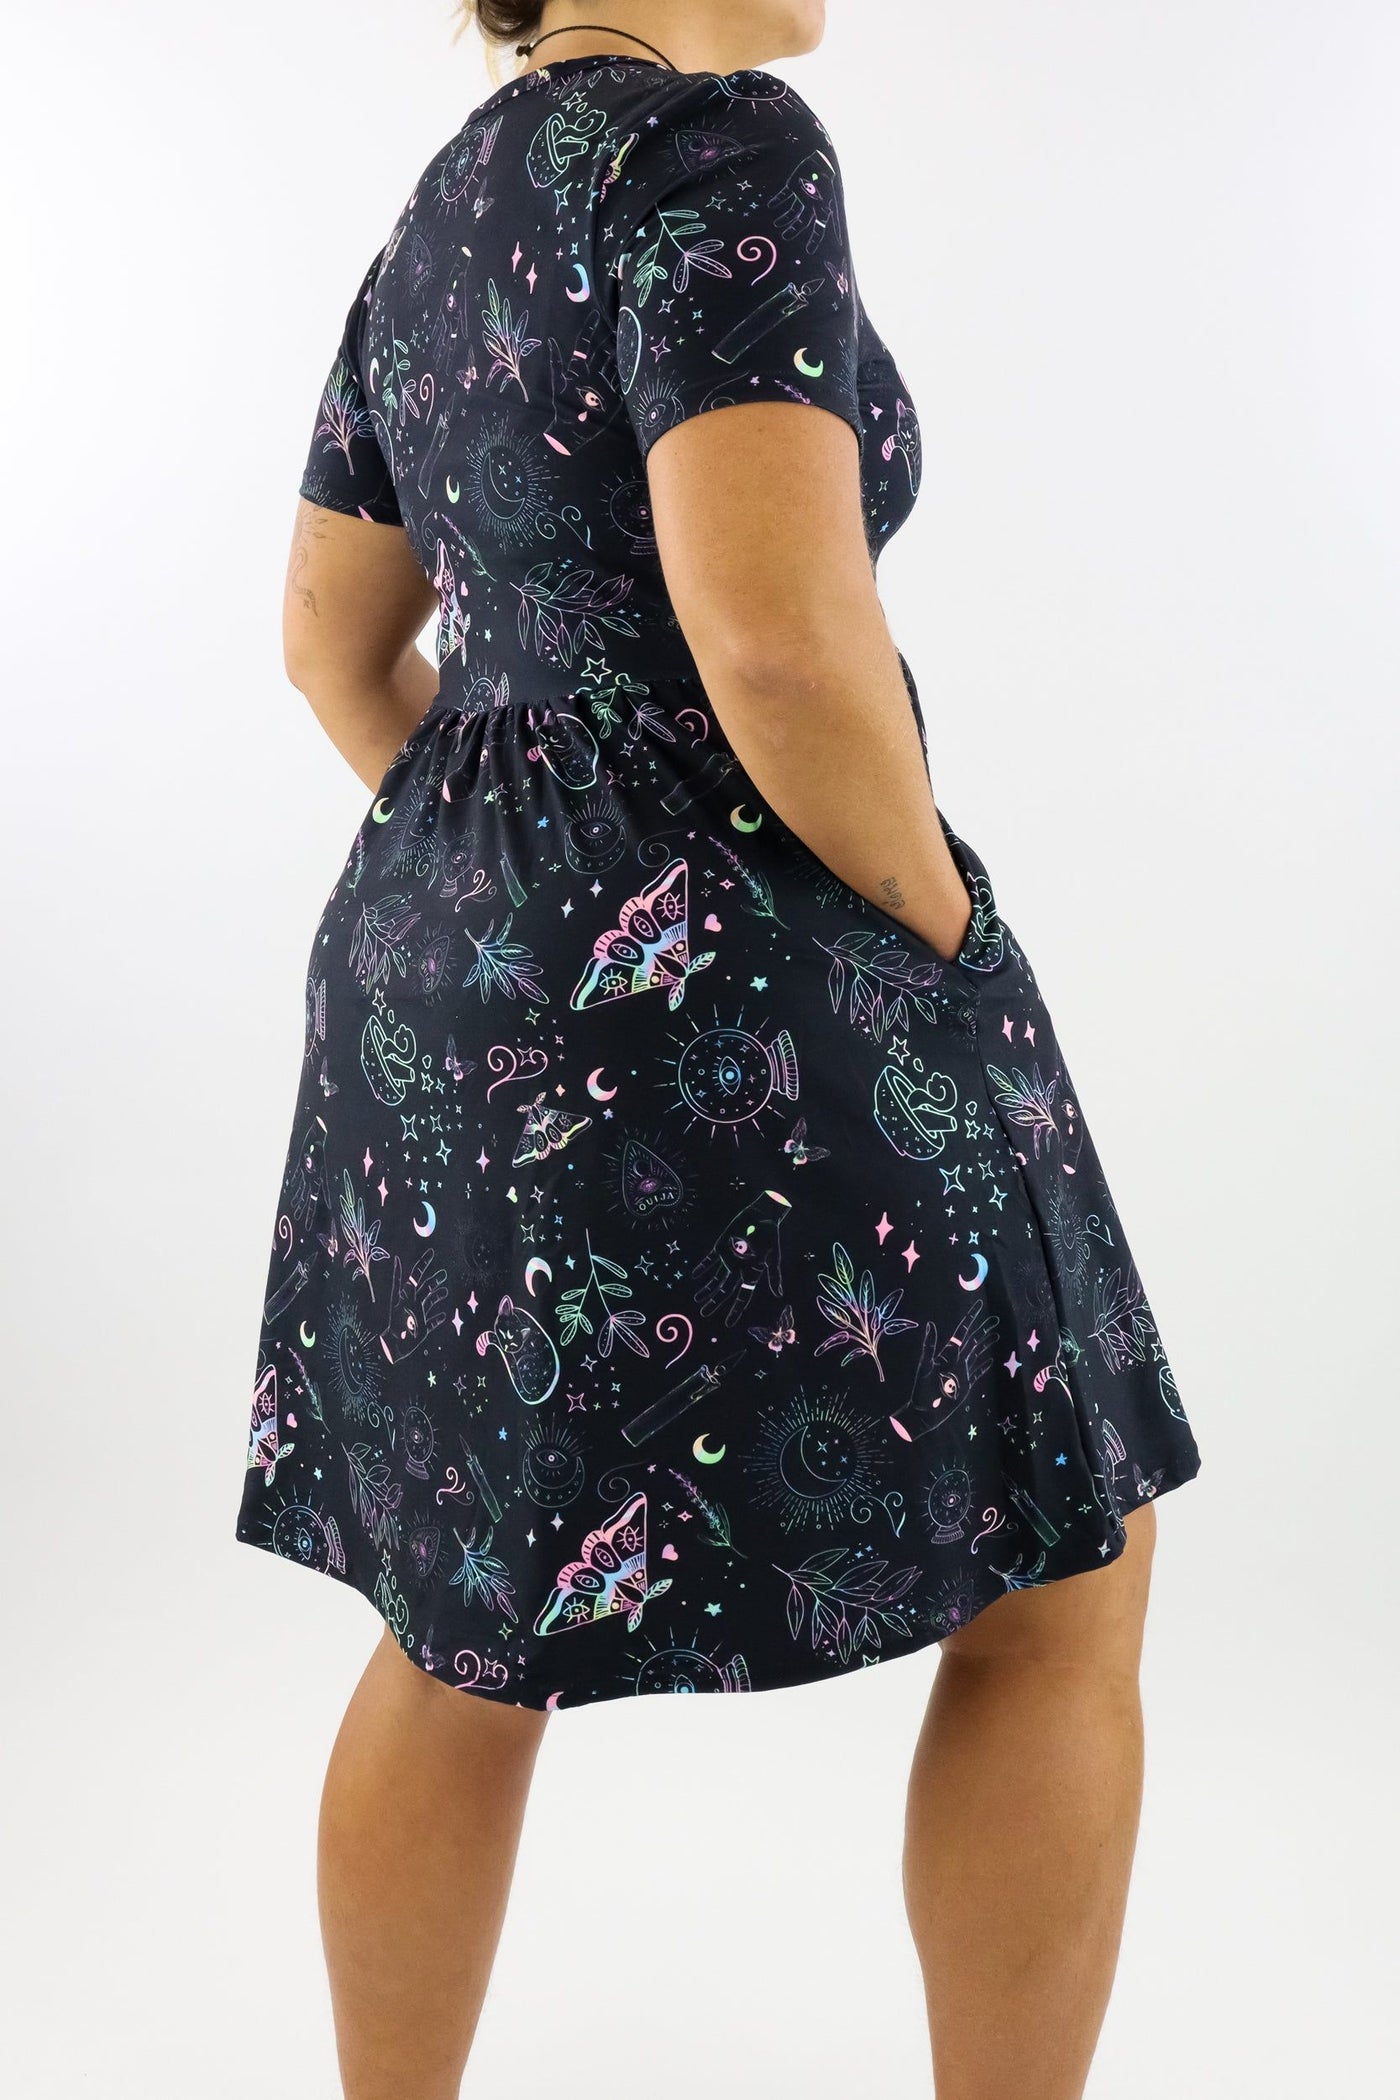 Holographic Witch - Short Sleeve Skater Dress - Knee Length - Side Pockets Knee Length Skater Dress Pawlie   